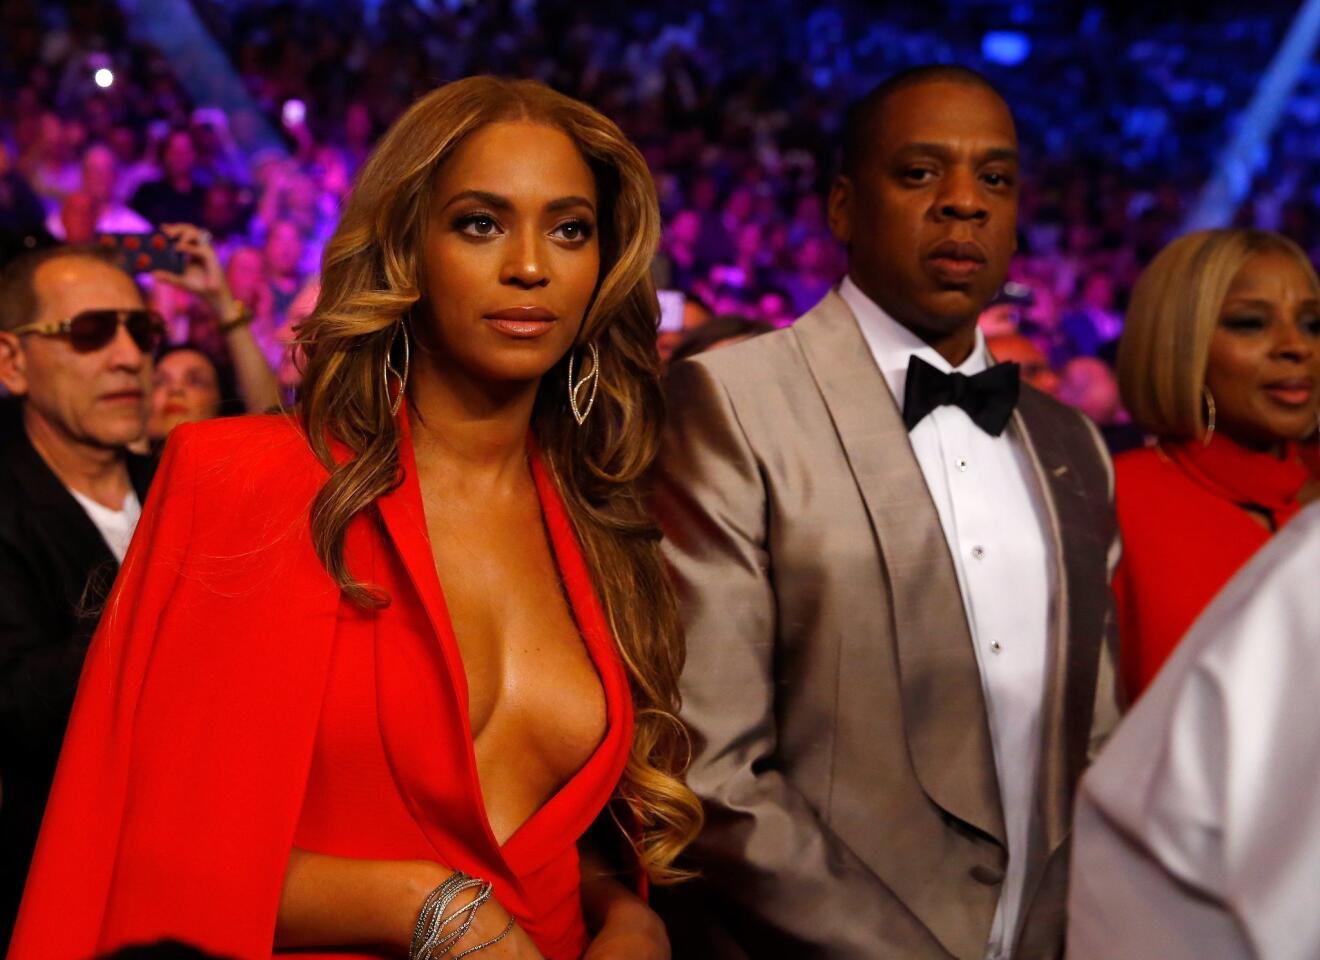 LAS VEGAS, NV - MAY 02: Beyonce Knowles and Jay Z attend the welterweight unification championship bout on May 2, 2015 at MGM Grand Garden Arena in Las Vegas, Nevada. (Photo by Al Bello/Getty Images) ** OUTS - ELSENT, FPG - OUTS * NM, PH, VA if sourced by CT, LA or MoD **